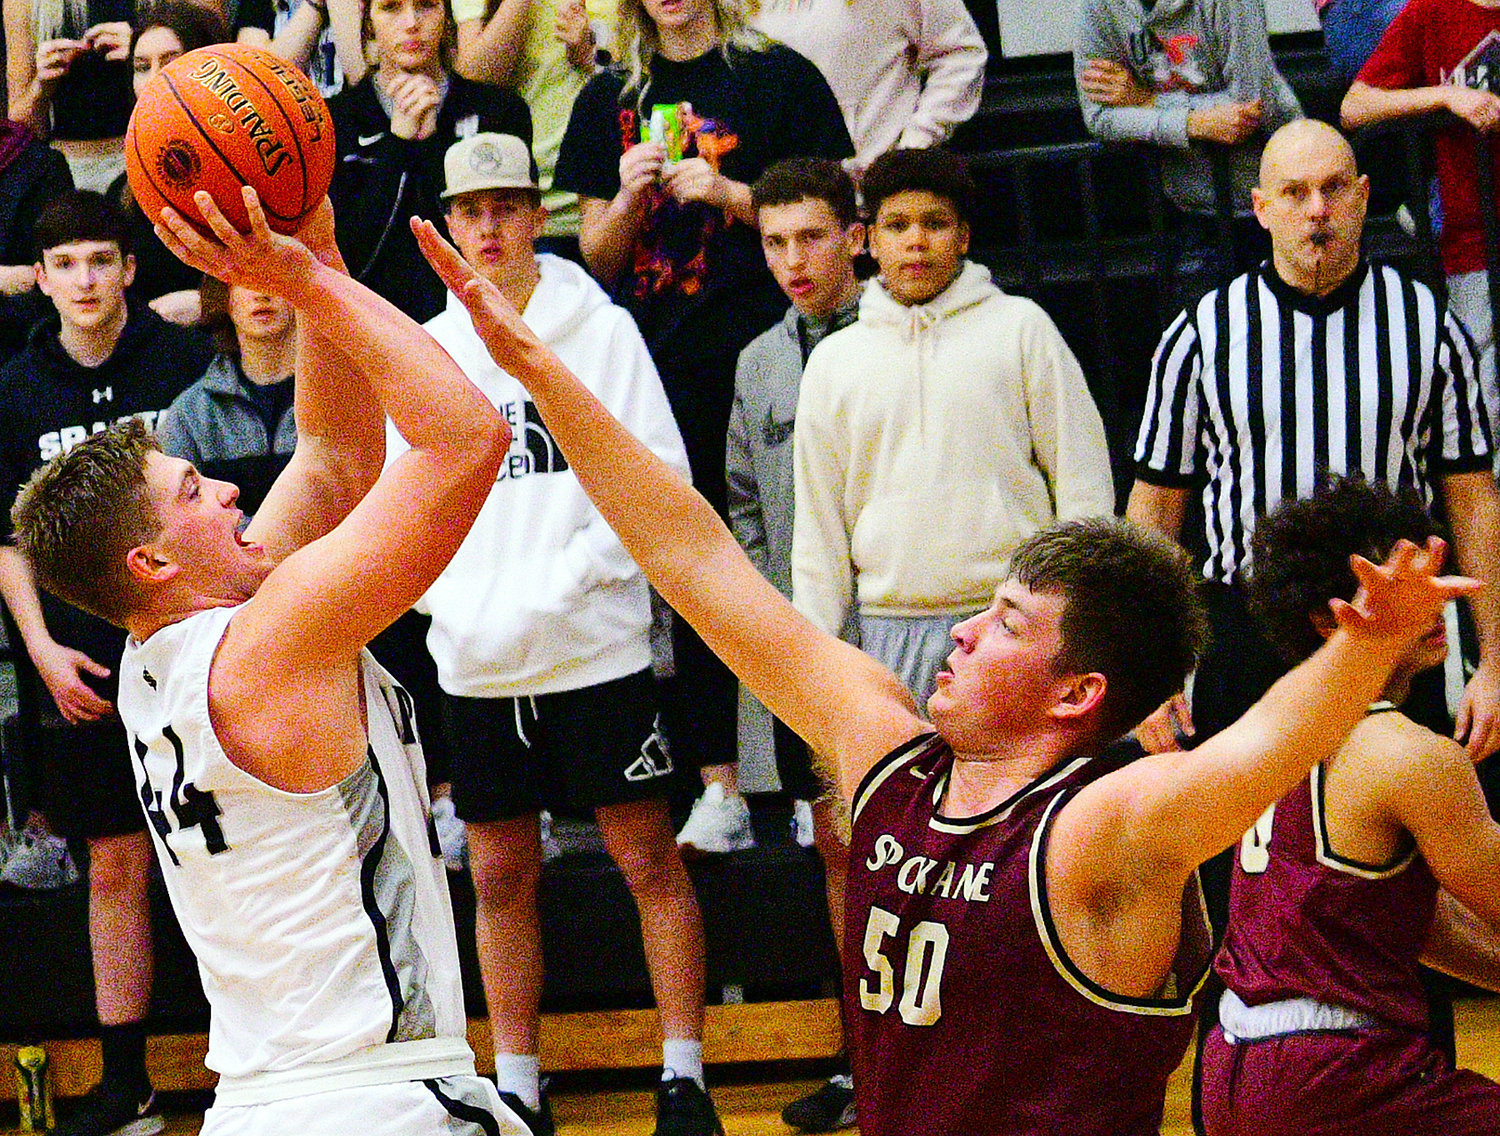 SPARTA’S DEXTER LOVELAND shoots over Spokane’s JD Tate in the teams’ Class 3 District 11 contest Monday.